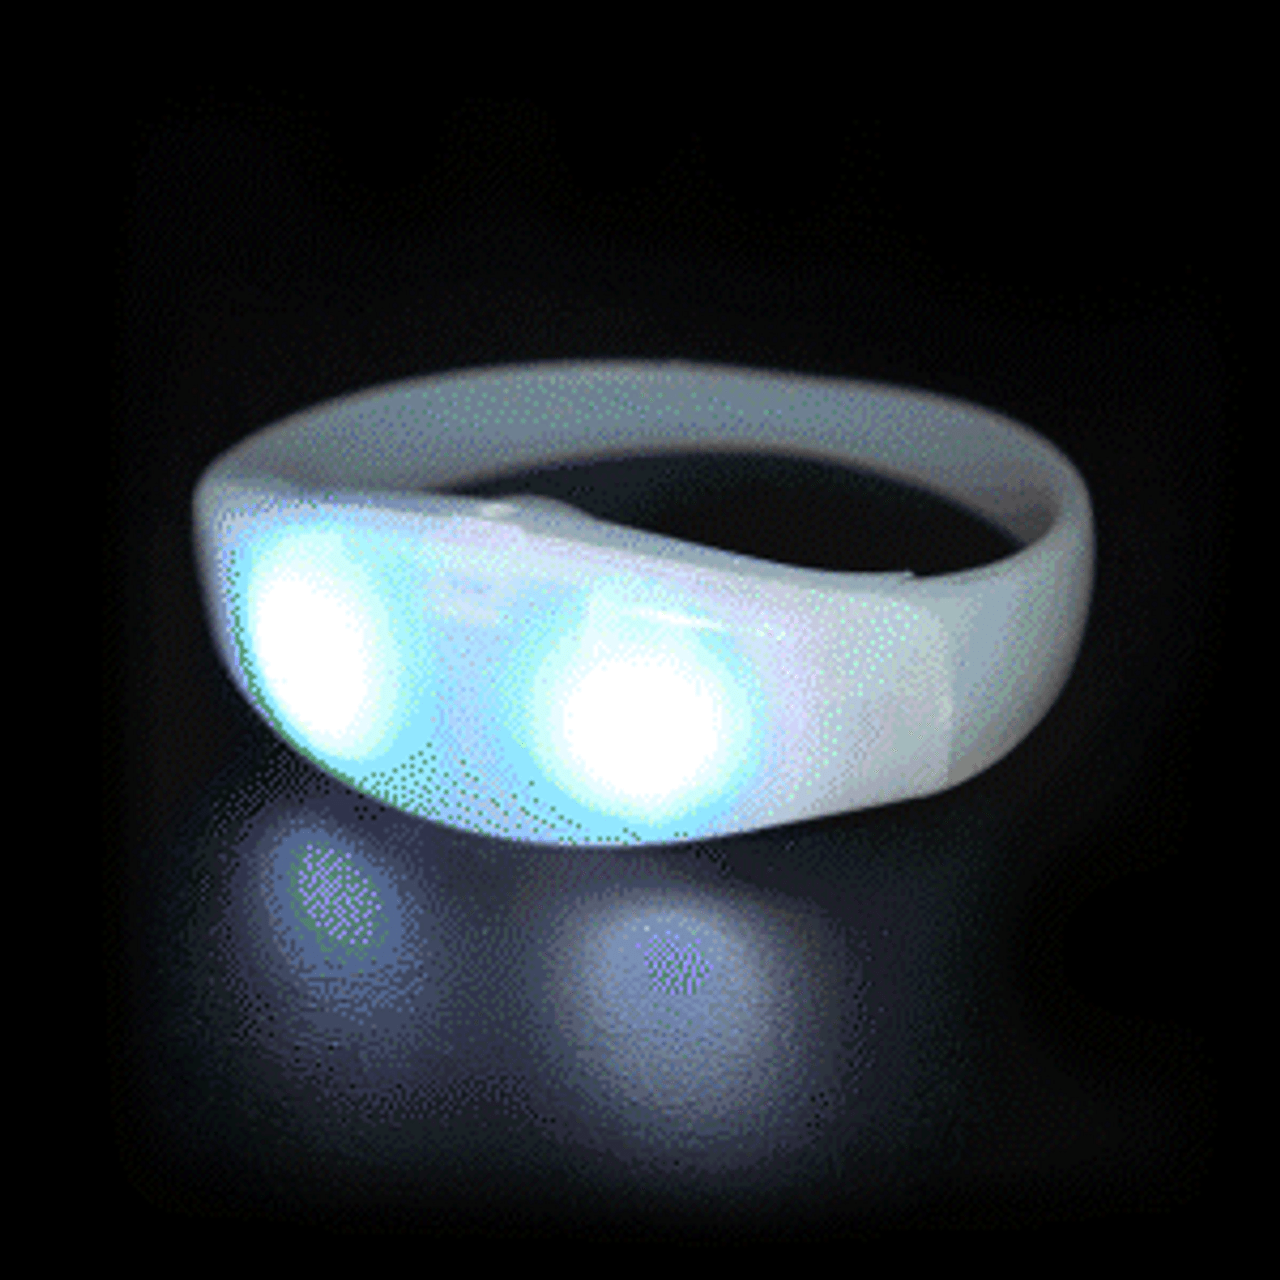 RF, DMXR, Remote, Glow, RGB, LED, Wireless, Wristband, Nightclubshop, LED, RF, DMXR, Remote, Glow, Wristband, Long, Range, Party, Festival, Concert, Rave, Ultra, LED, DMX, RF, Remote, Controlled, Crowd, Sync, RGB, Wristband, Nightclub, RFID, NFC, Charger, Multi Charger, Ice Bucket, bucket, ice, remote, control, controller